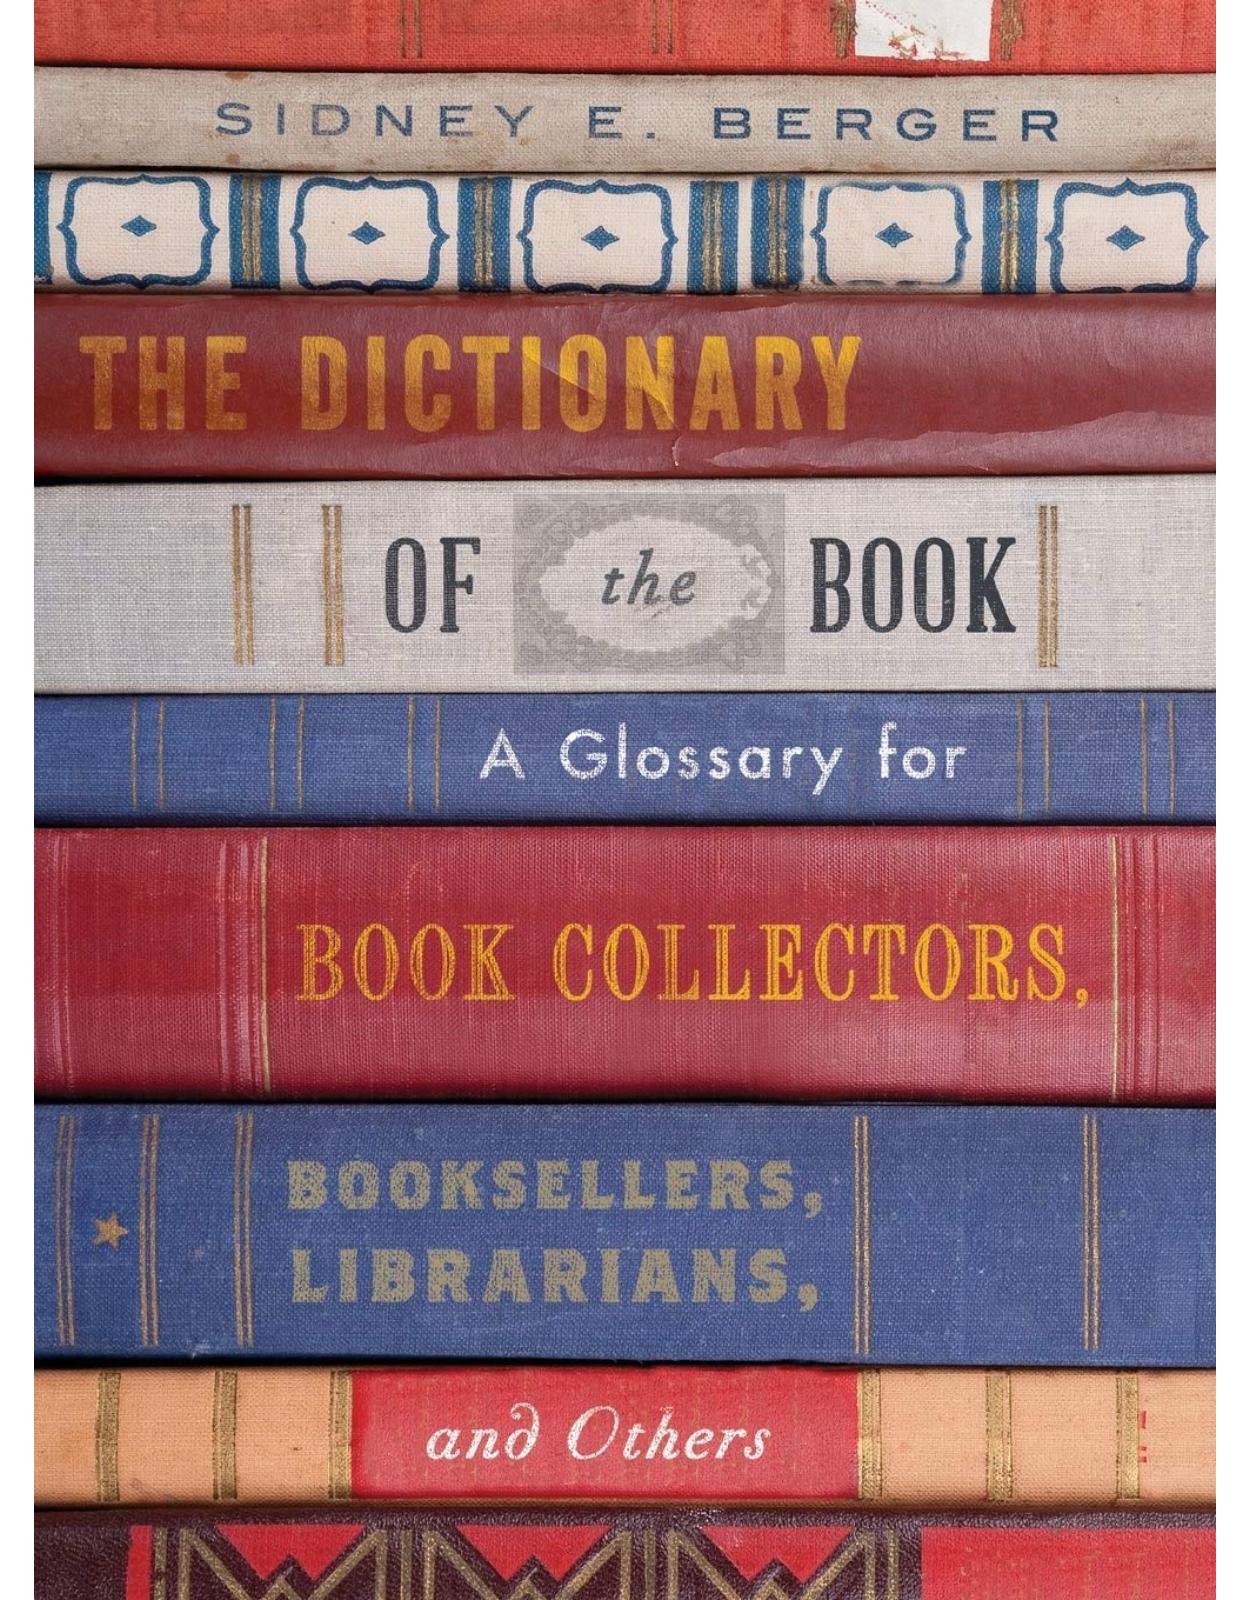 The Dictionary of the Book: A Glossary for Book Collectors, Booksellers, Librarians, and Others